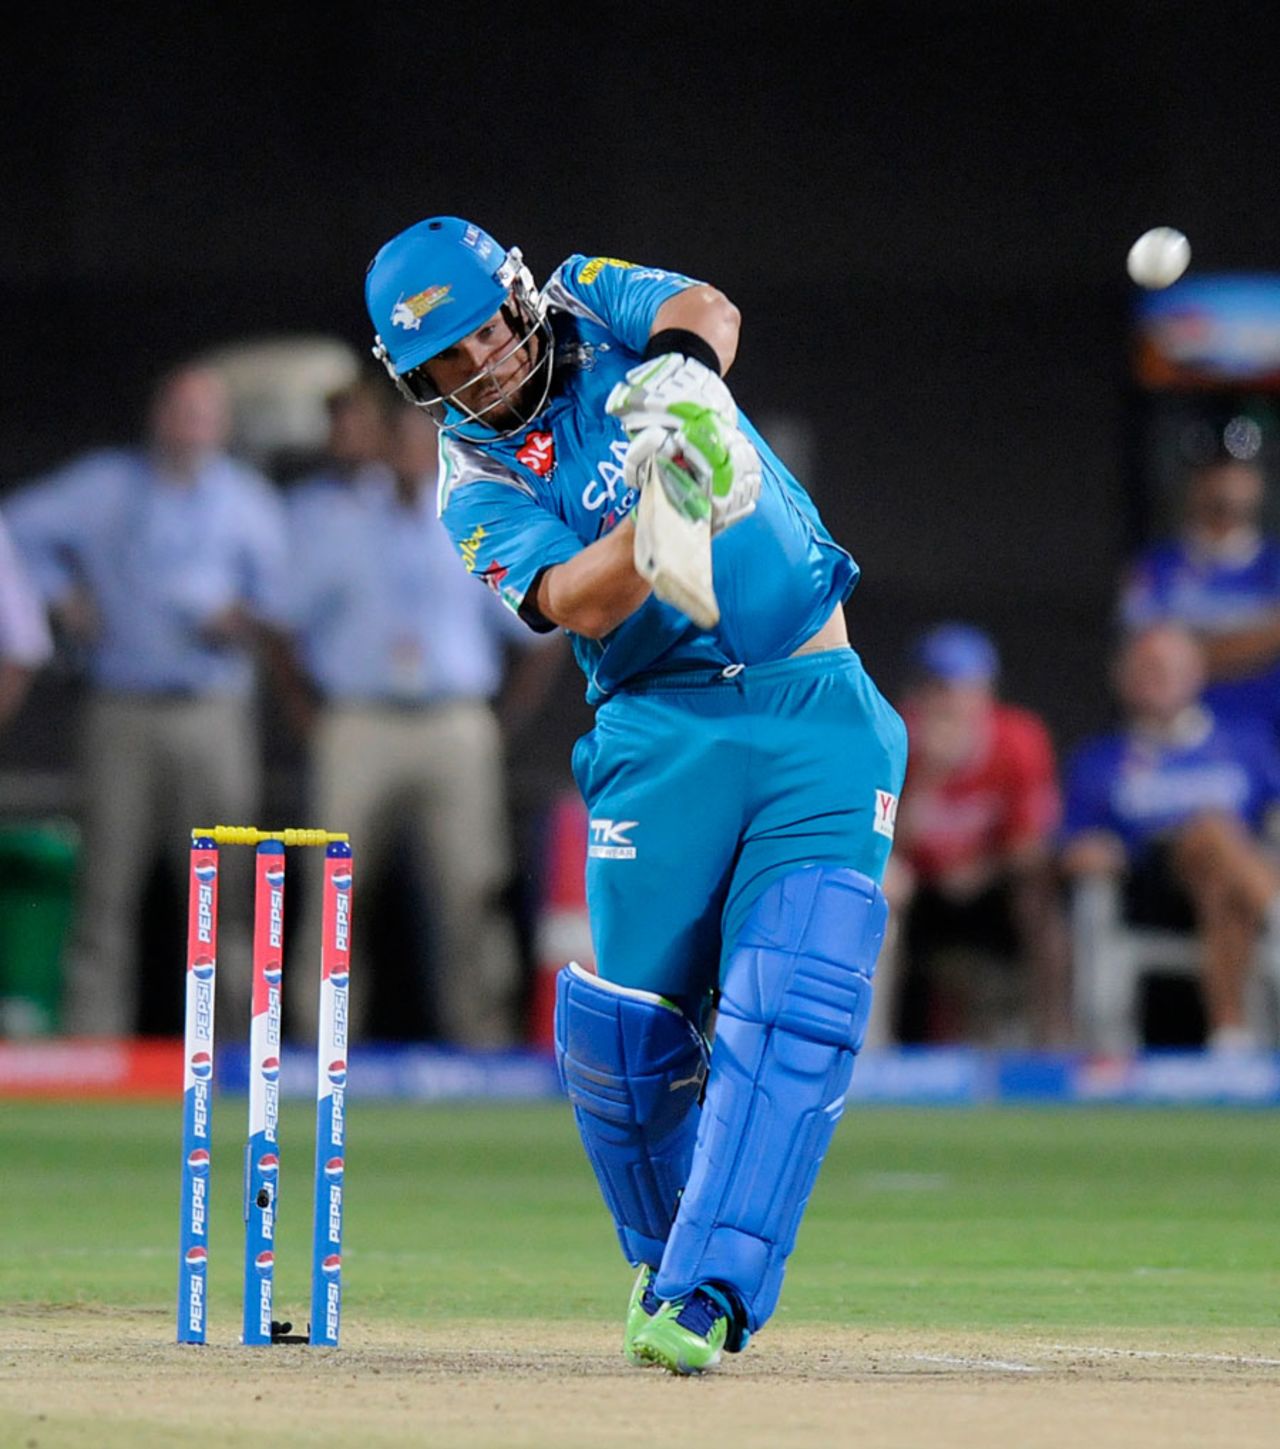 Aaron Finch hits one out of the screws, Pune Warriors v Rajasthan Royals, IPL, Pune, April 11, 2013